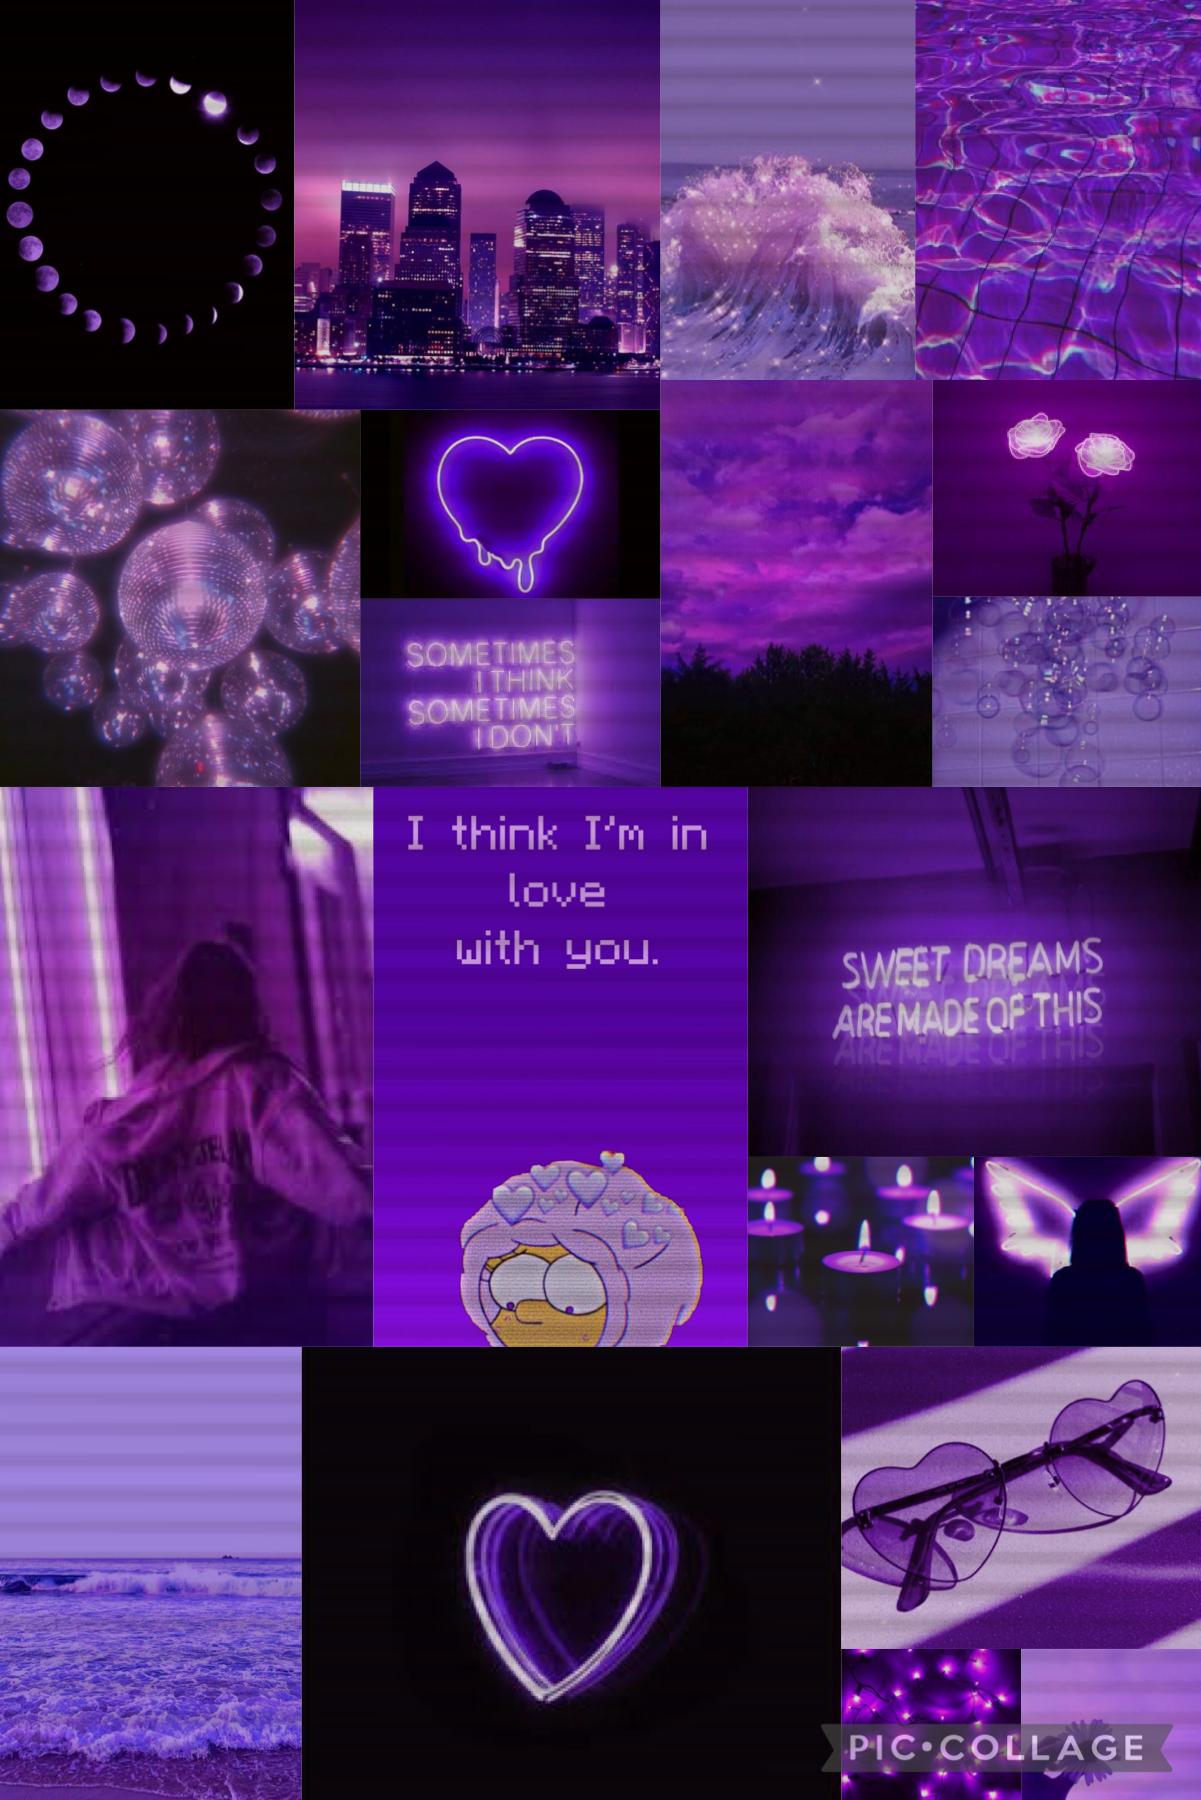 💜💟Tap💟💜
Hey y’all! Sry I haven’t posted in a while but here is a Purple Aesthetic, let me know what aesthetic I should do next!